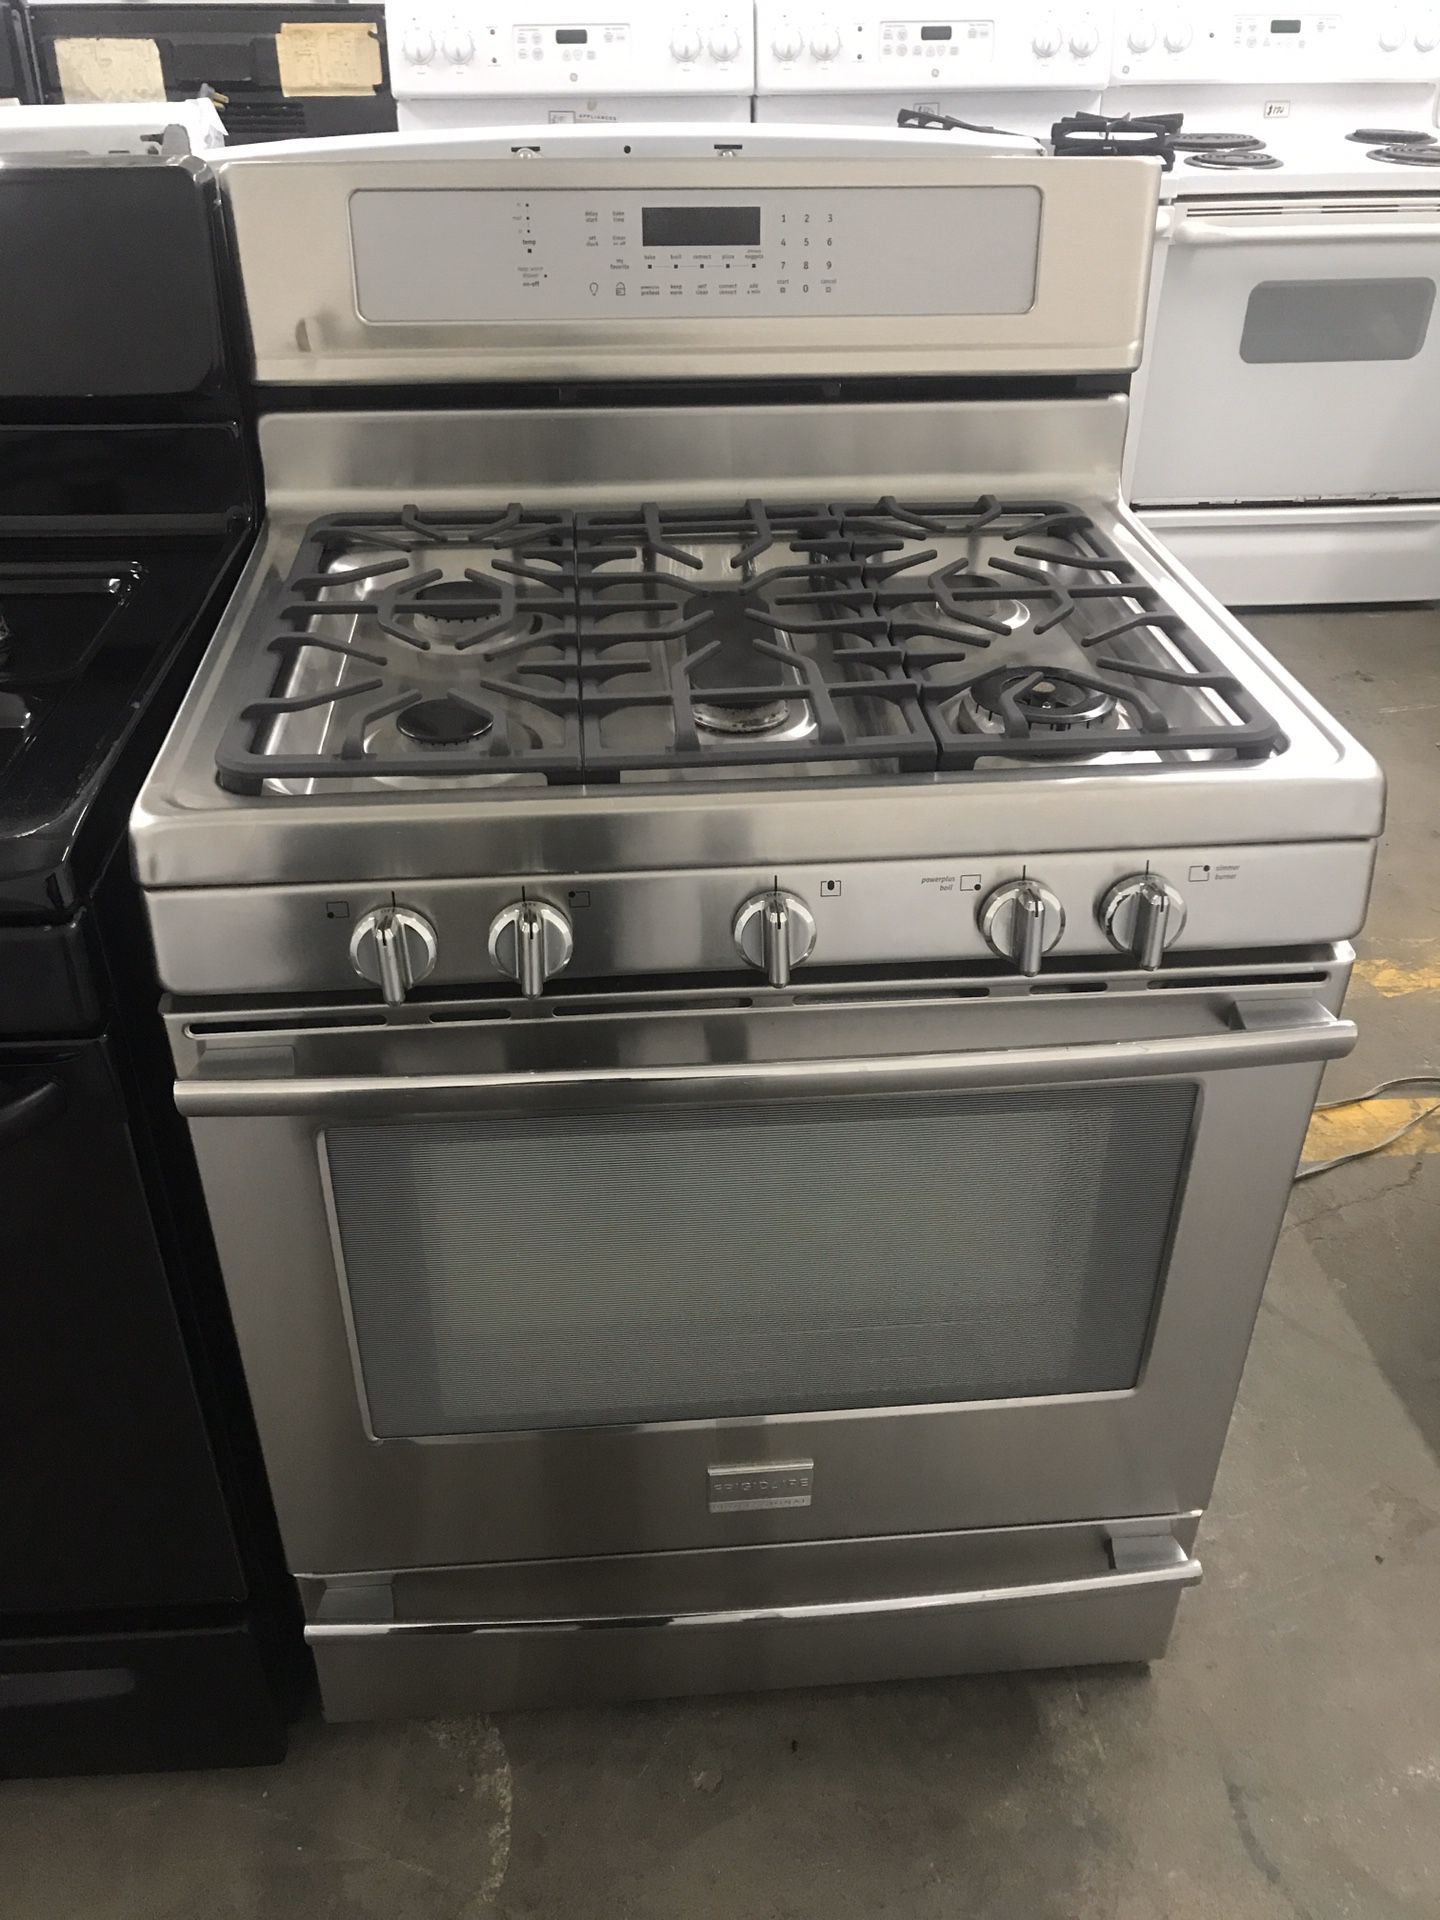 All stainless steel stove